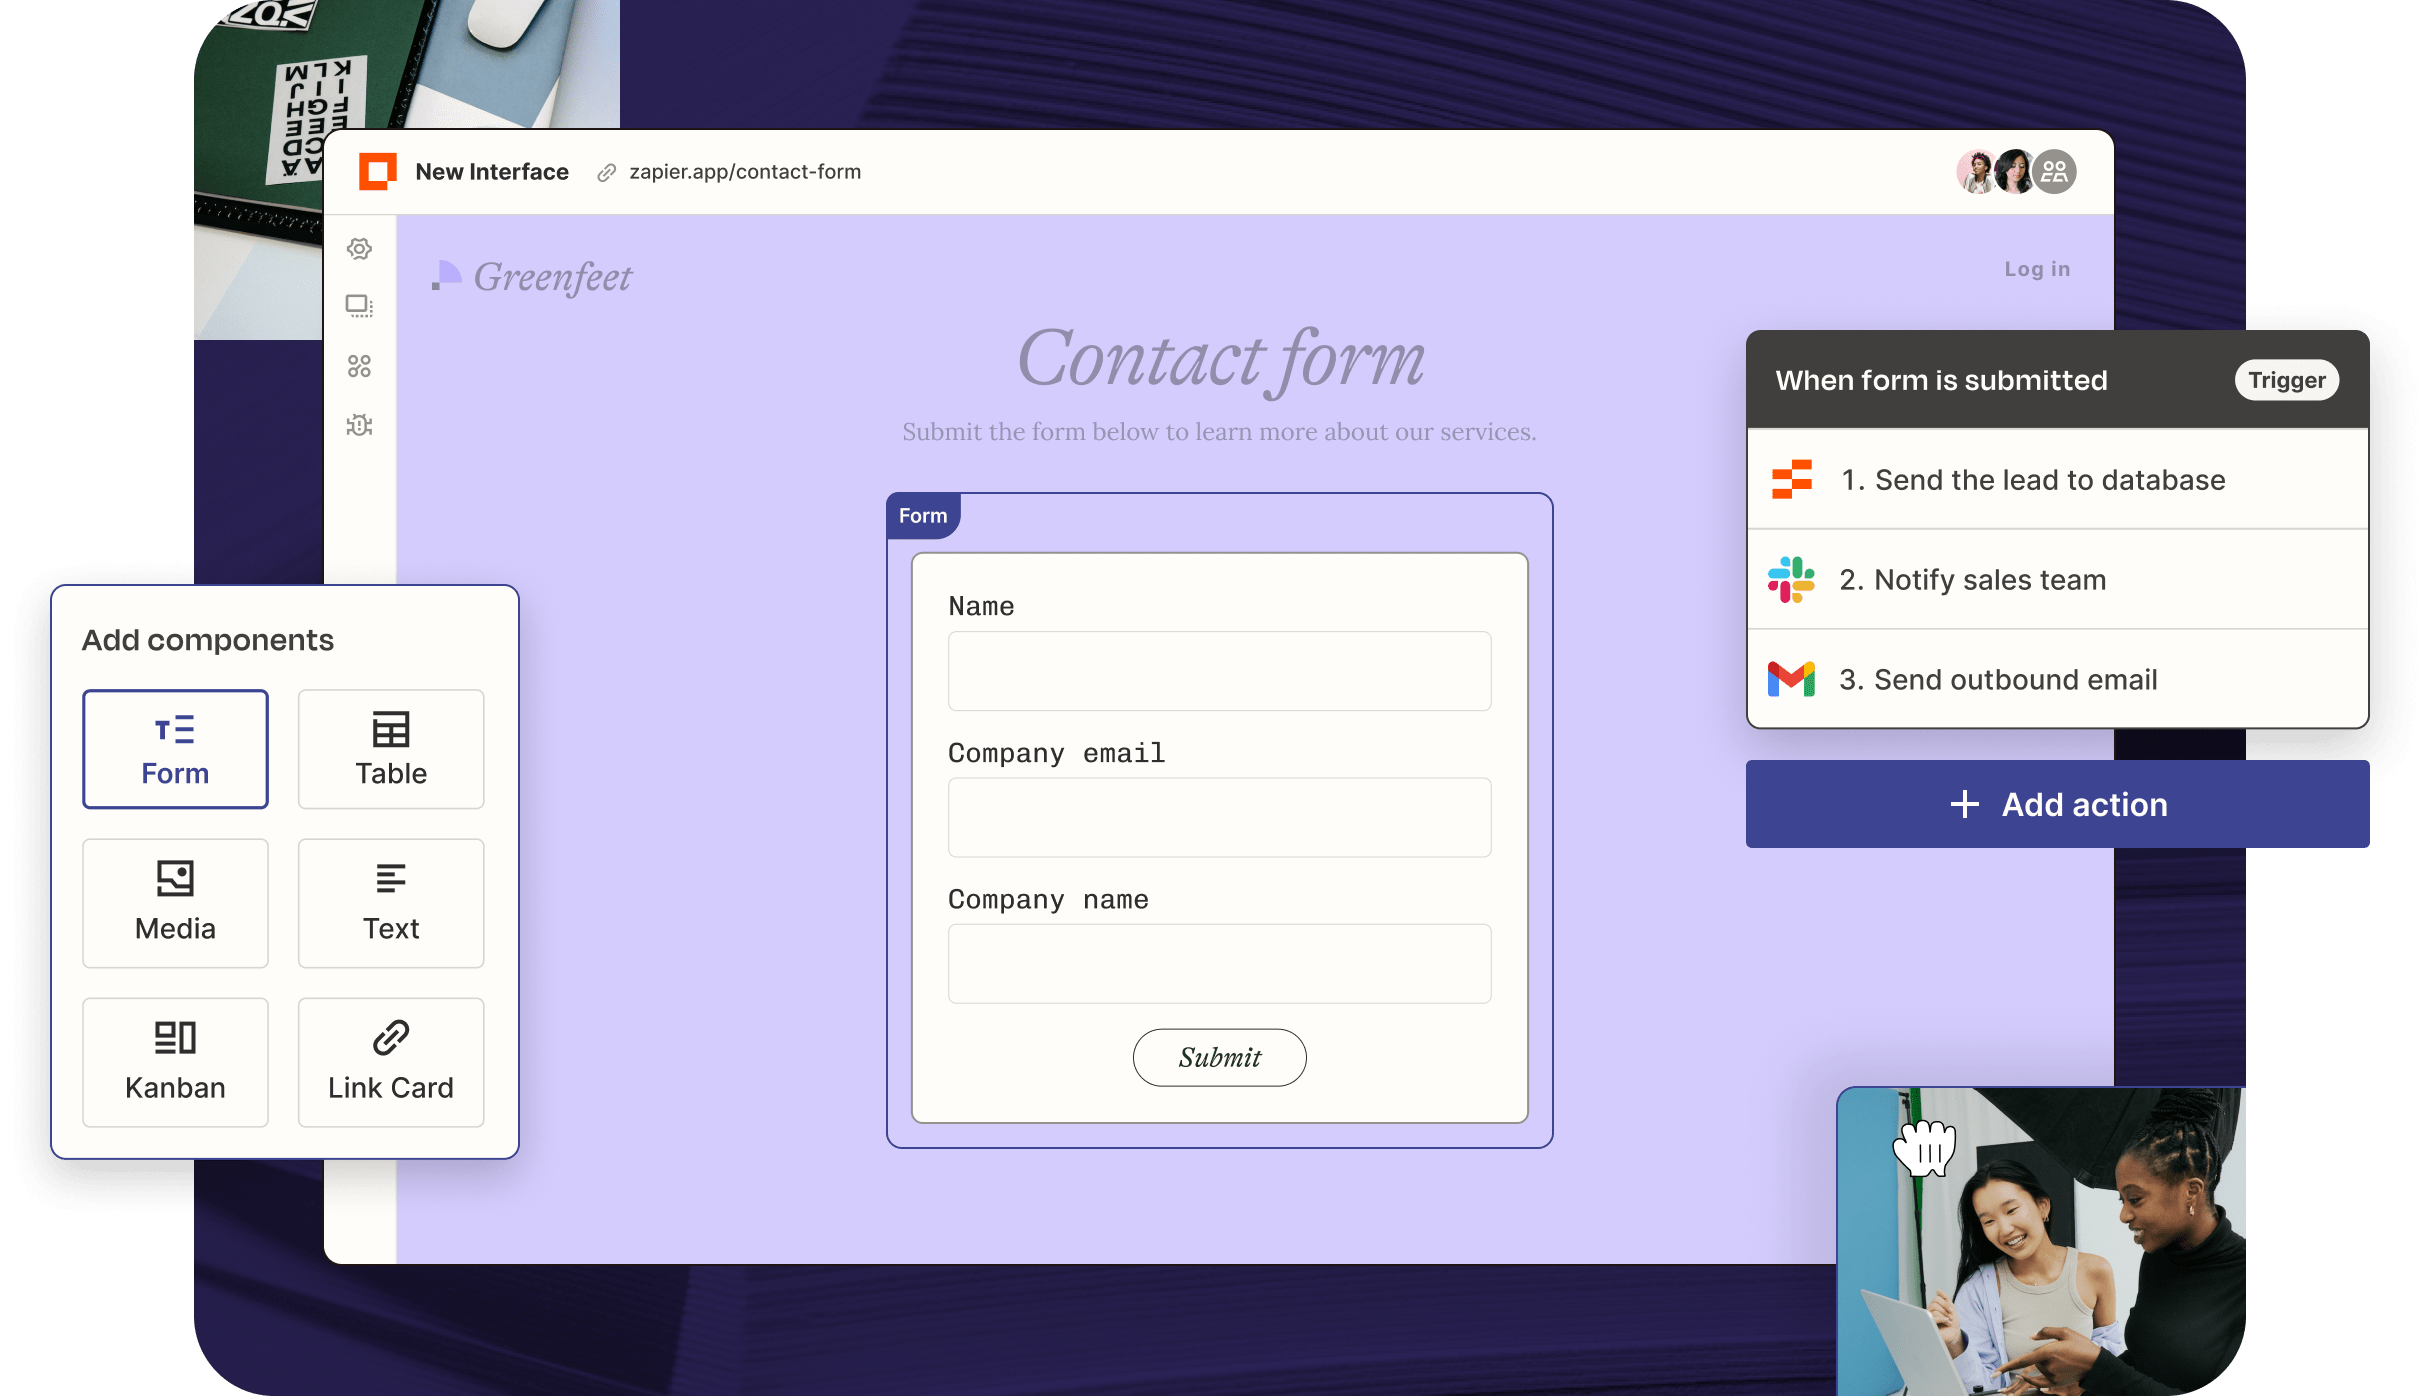 an Interface of a Contact form with automations to notify teams in slack and send at outbound email